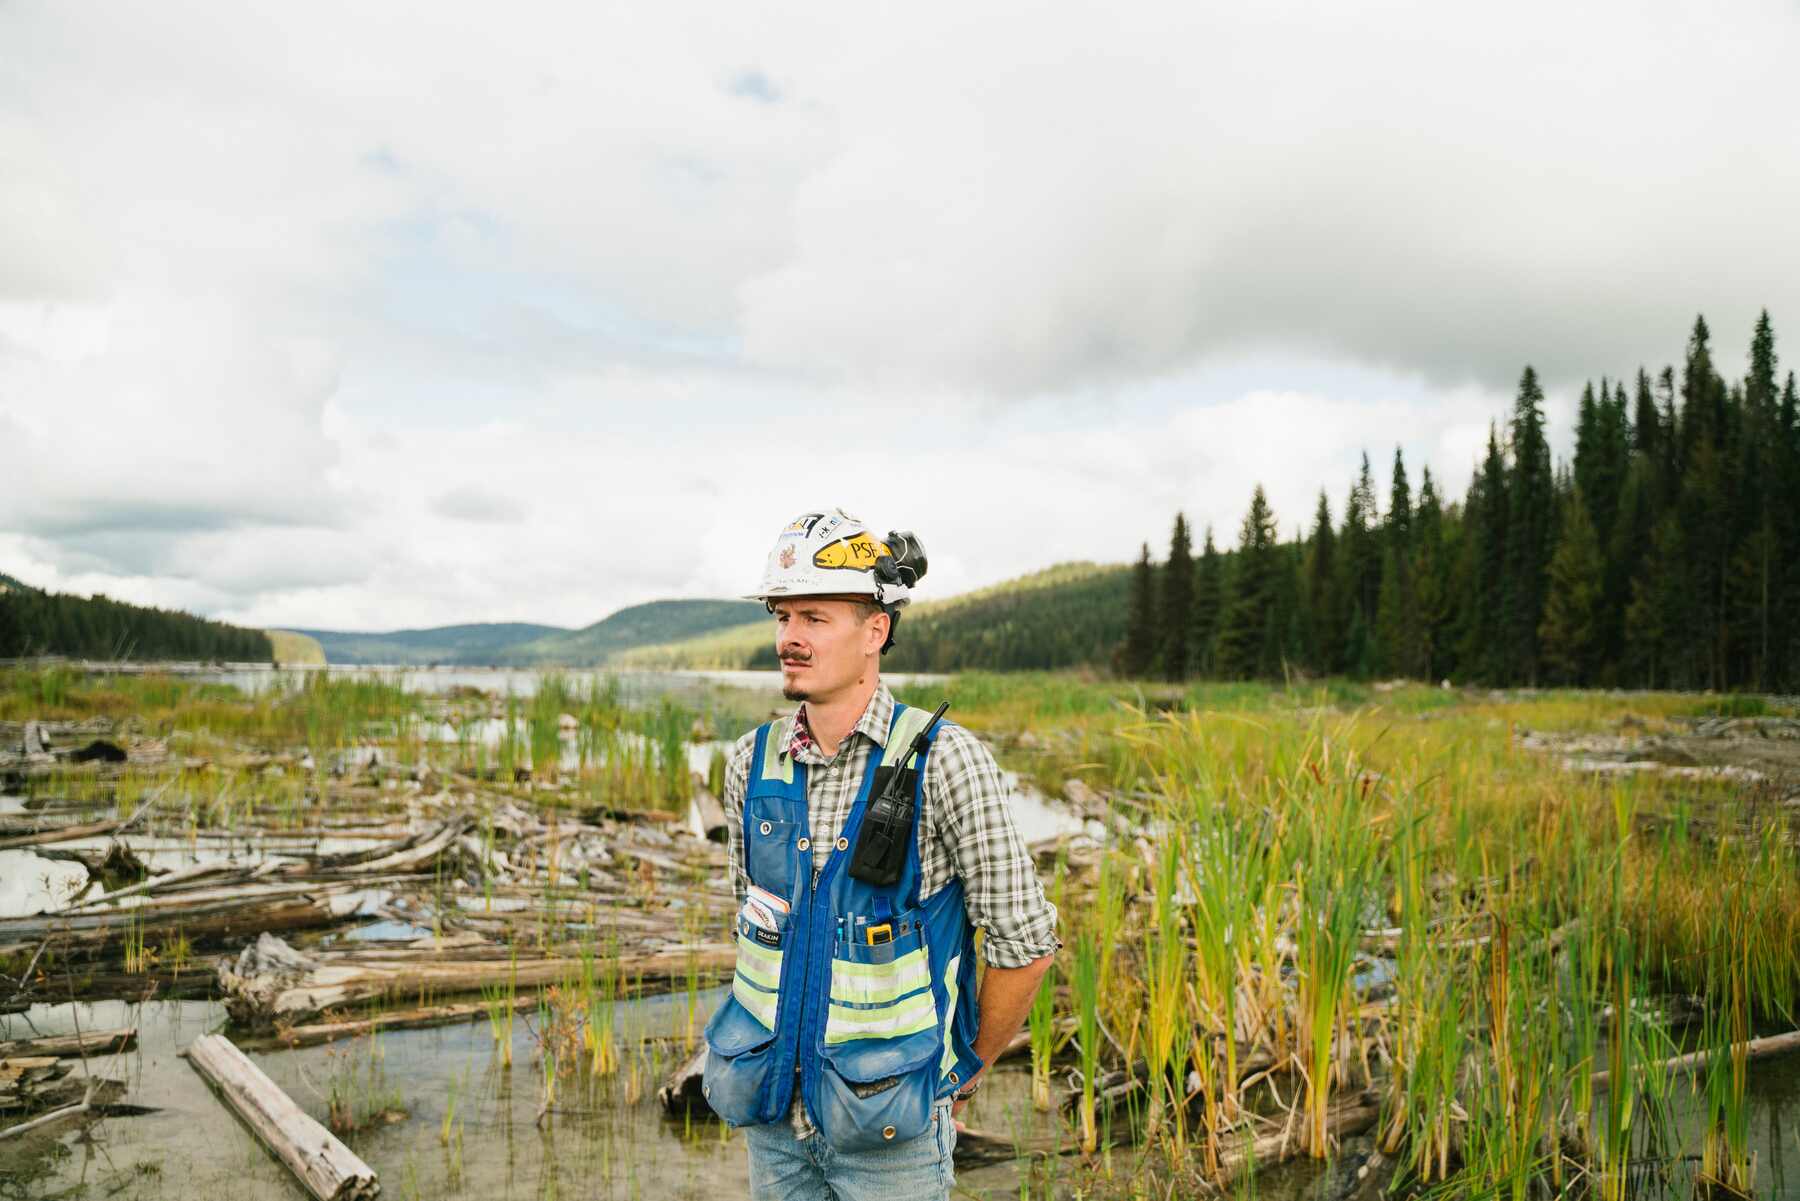 Man wearing a safety hat while observing a swamp area